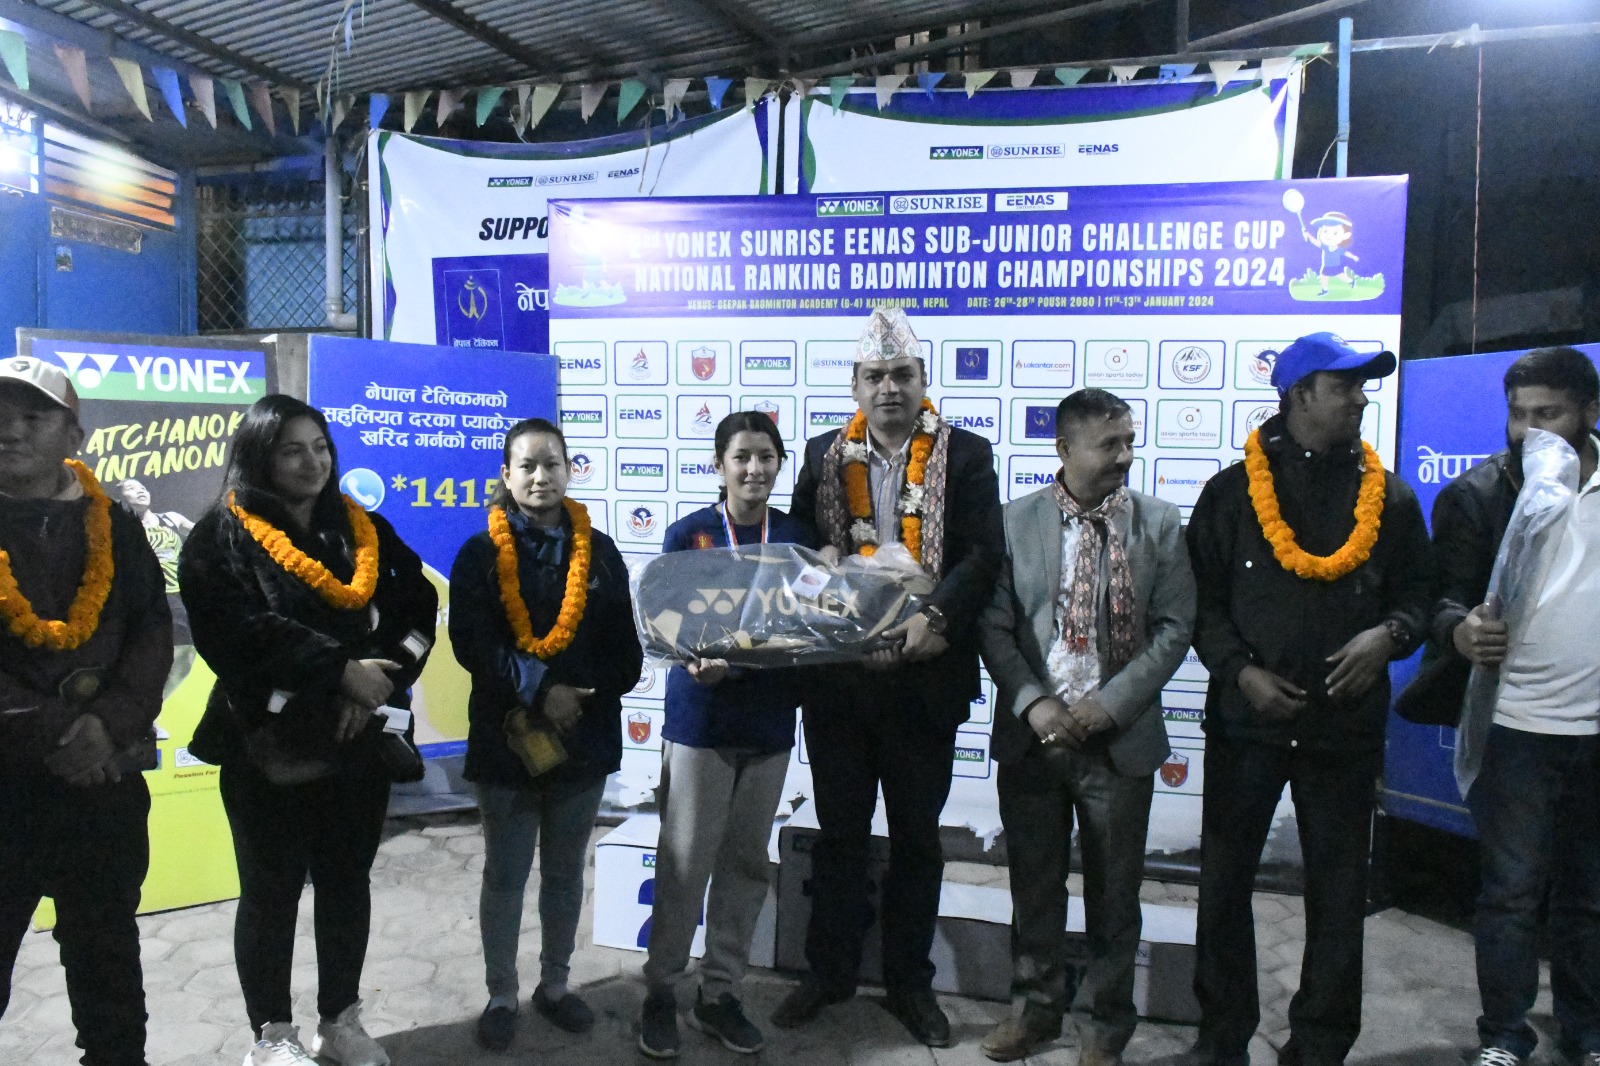 Prize Distribution and Closing Ceremony